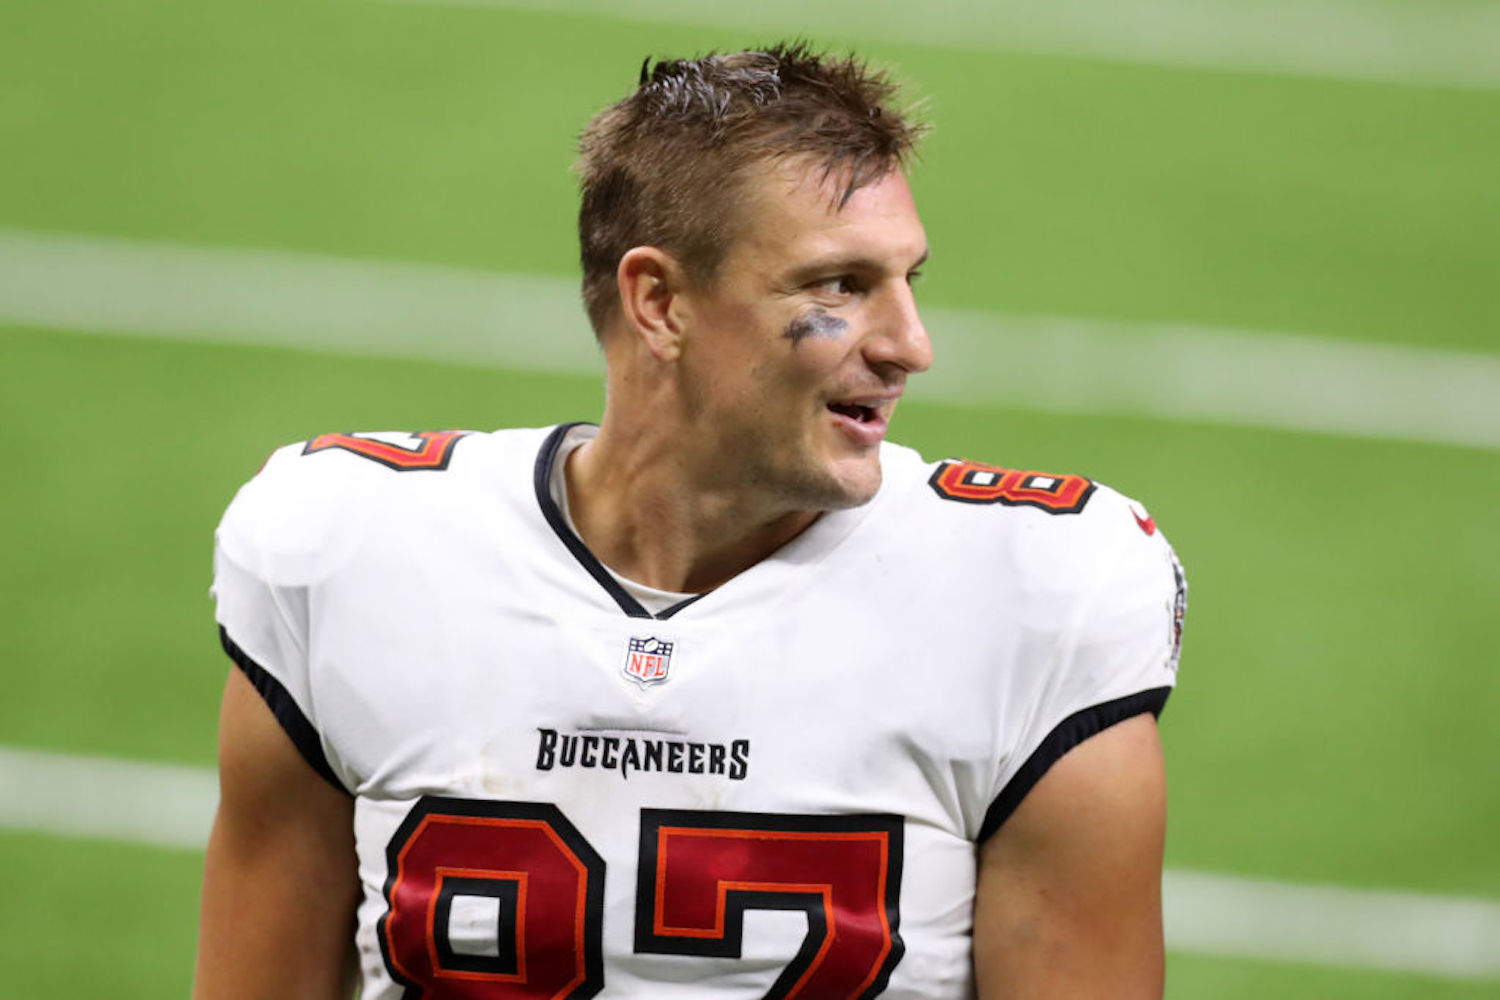 Rob Gronkowski Just Sent a Discouraging Message to His Fantasy Football Owners